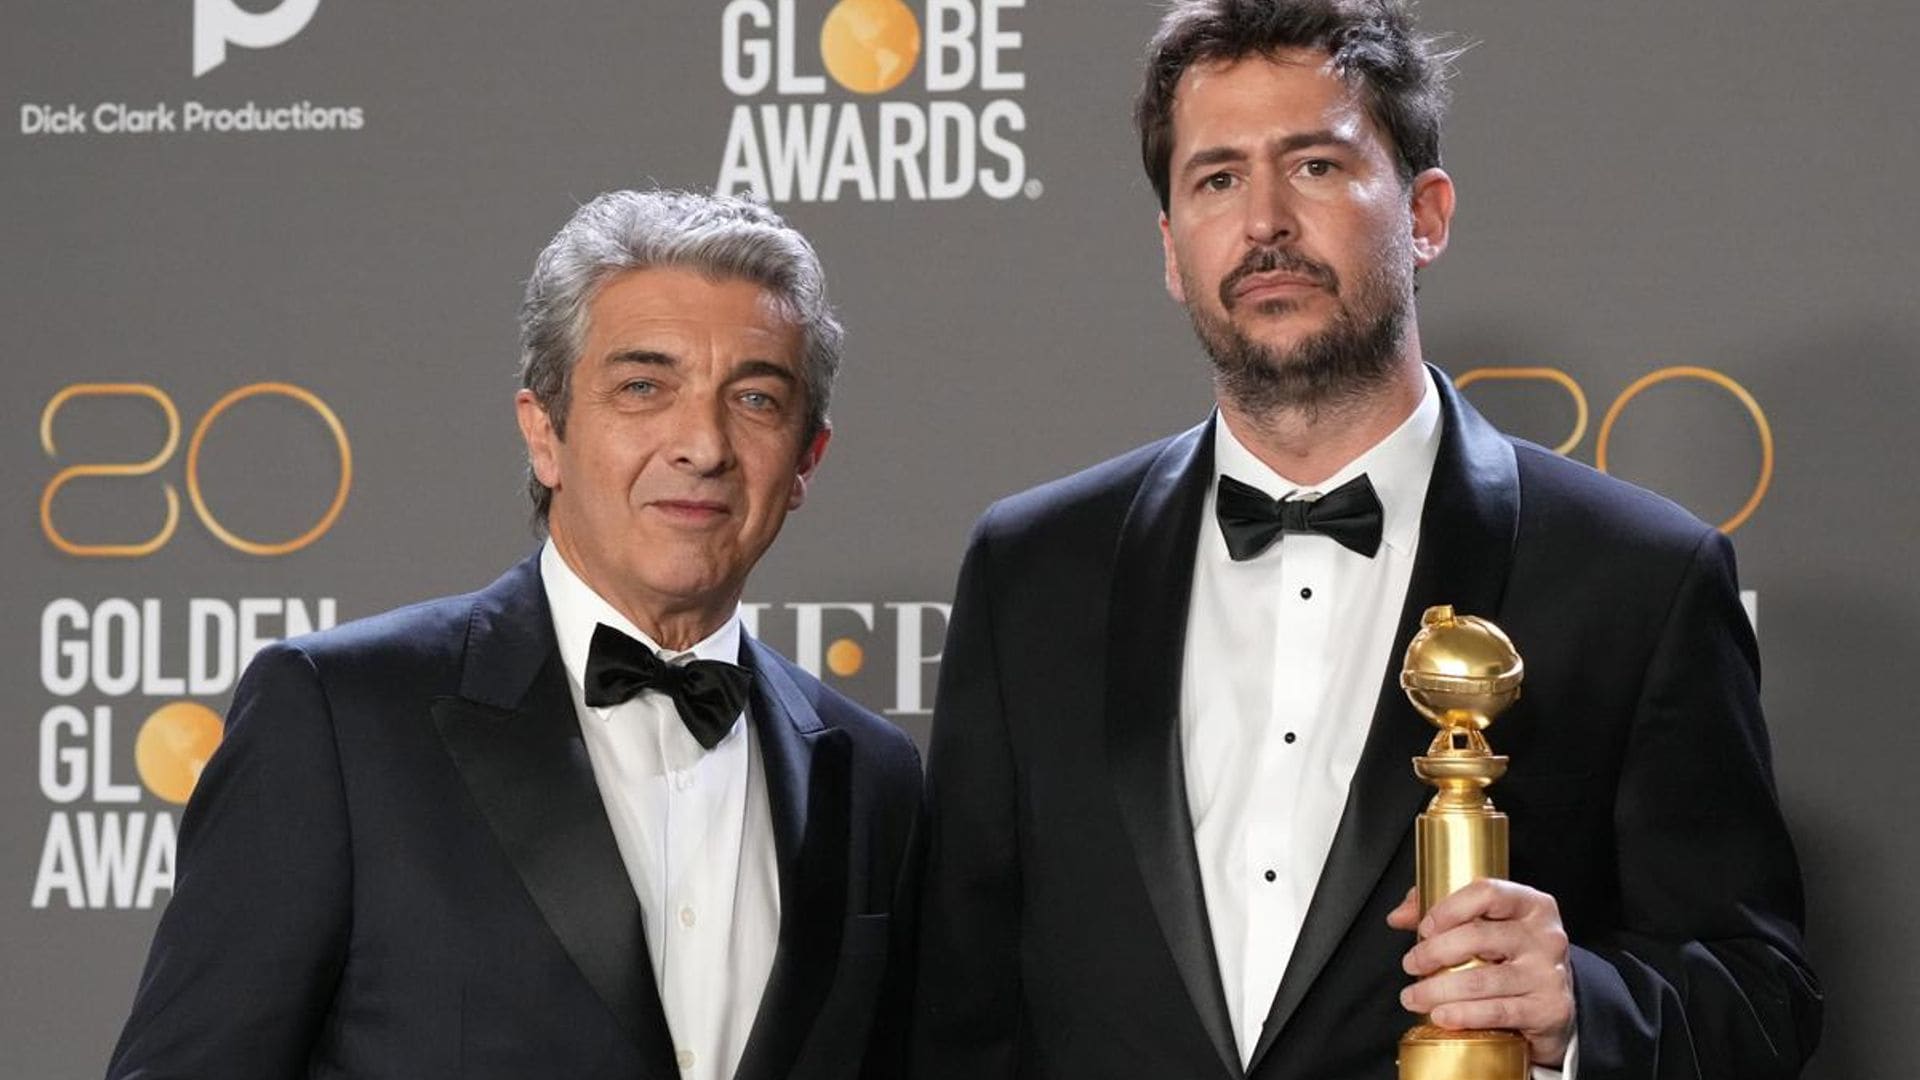 ‘Argentina 1985’ could be Oscars surprise following Golden Globes win